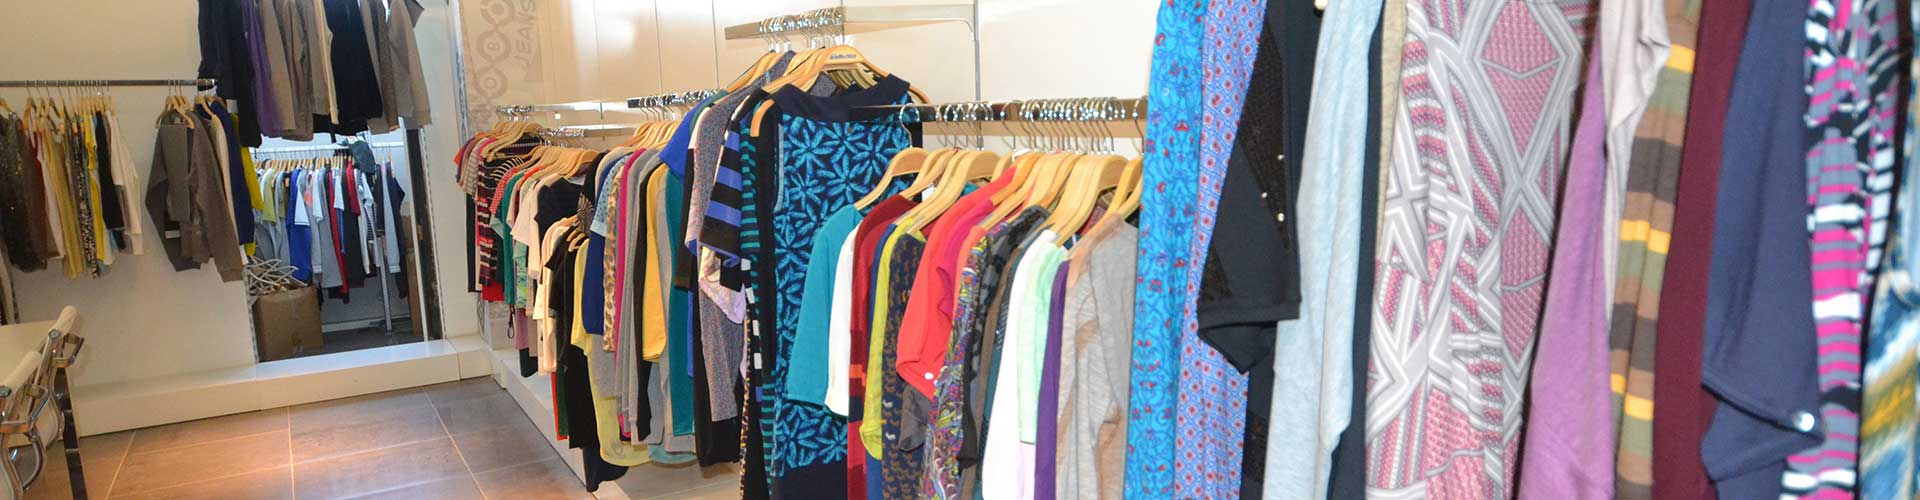 Clothing manufacturers in Turkey